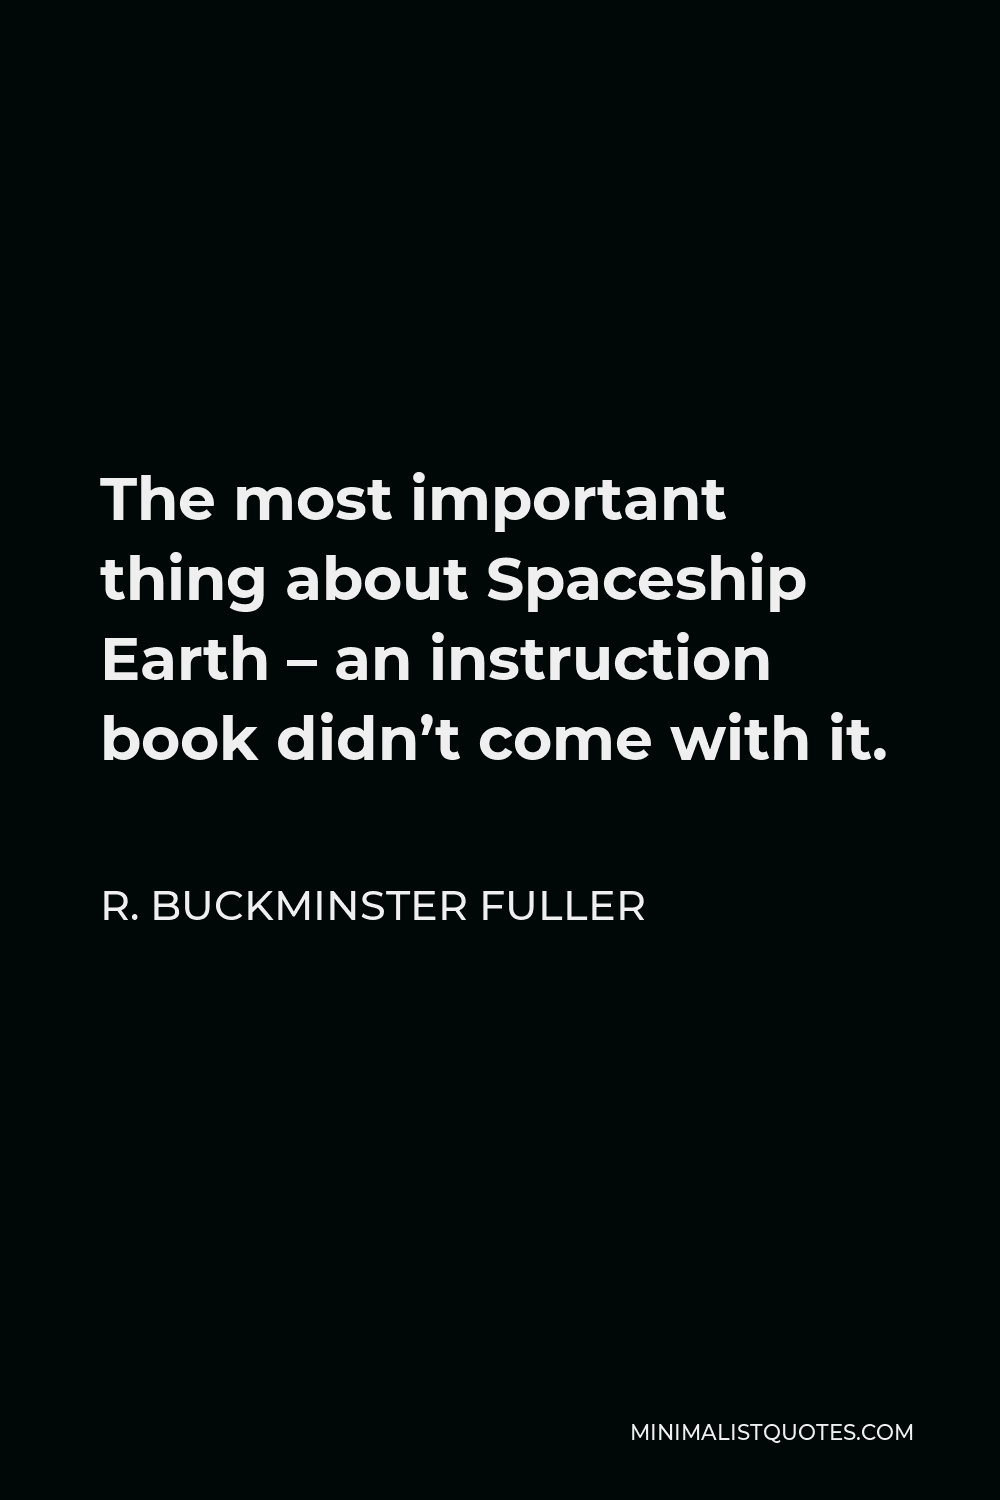 R. Buckminster Fuller Quote - The most important thing about Spaceship Earth – an instruction book didn’t come with it.